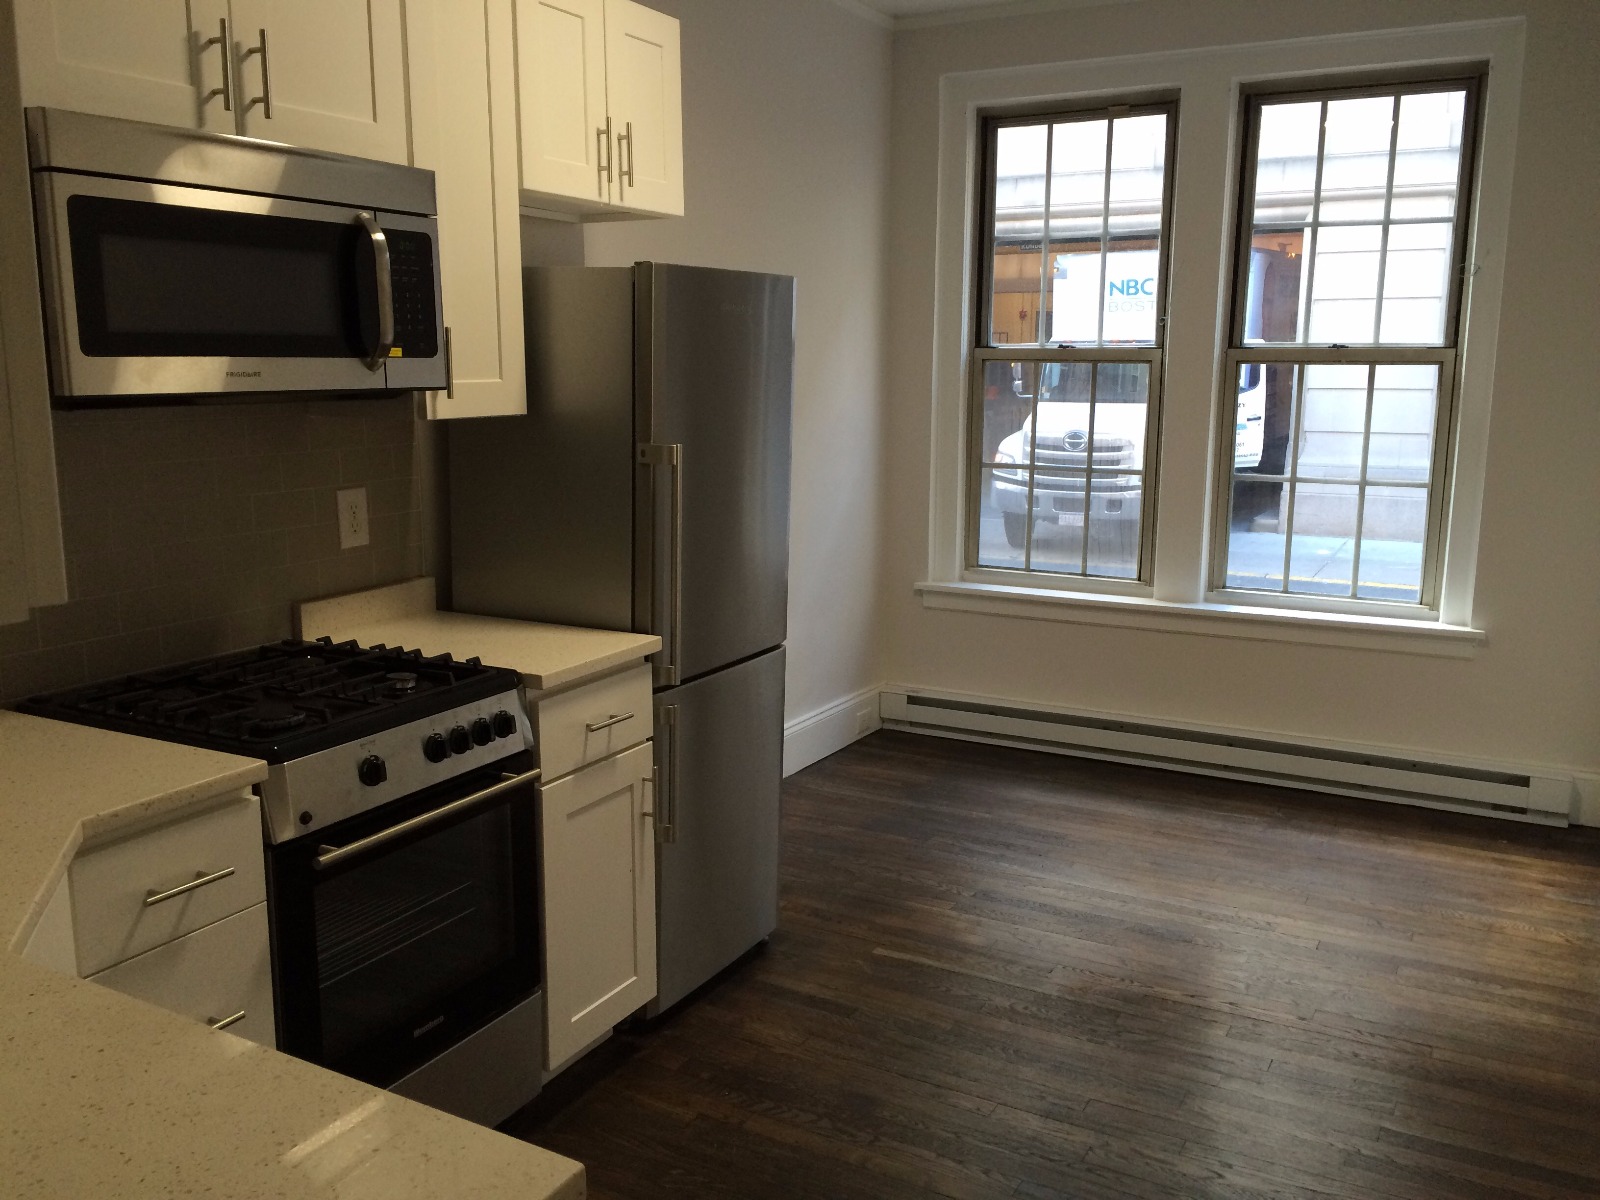 Photos of apartment on Clearway,Boston MA 02115